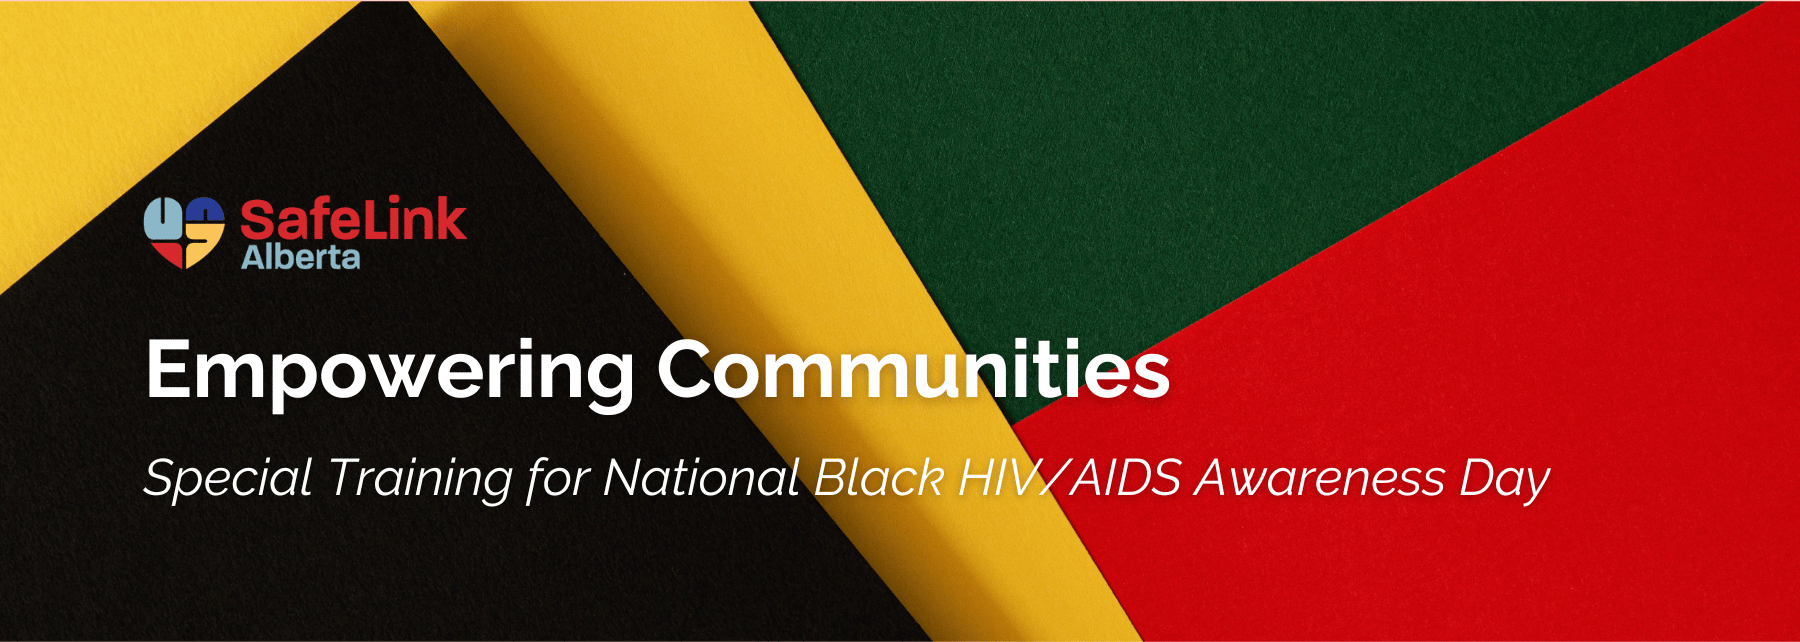 Yellow, black, red, and green graphic with shapes. Text reads "Empowering Communities, Special Training for National Black HIV/AIDS Awareness Day"